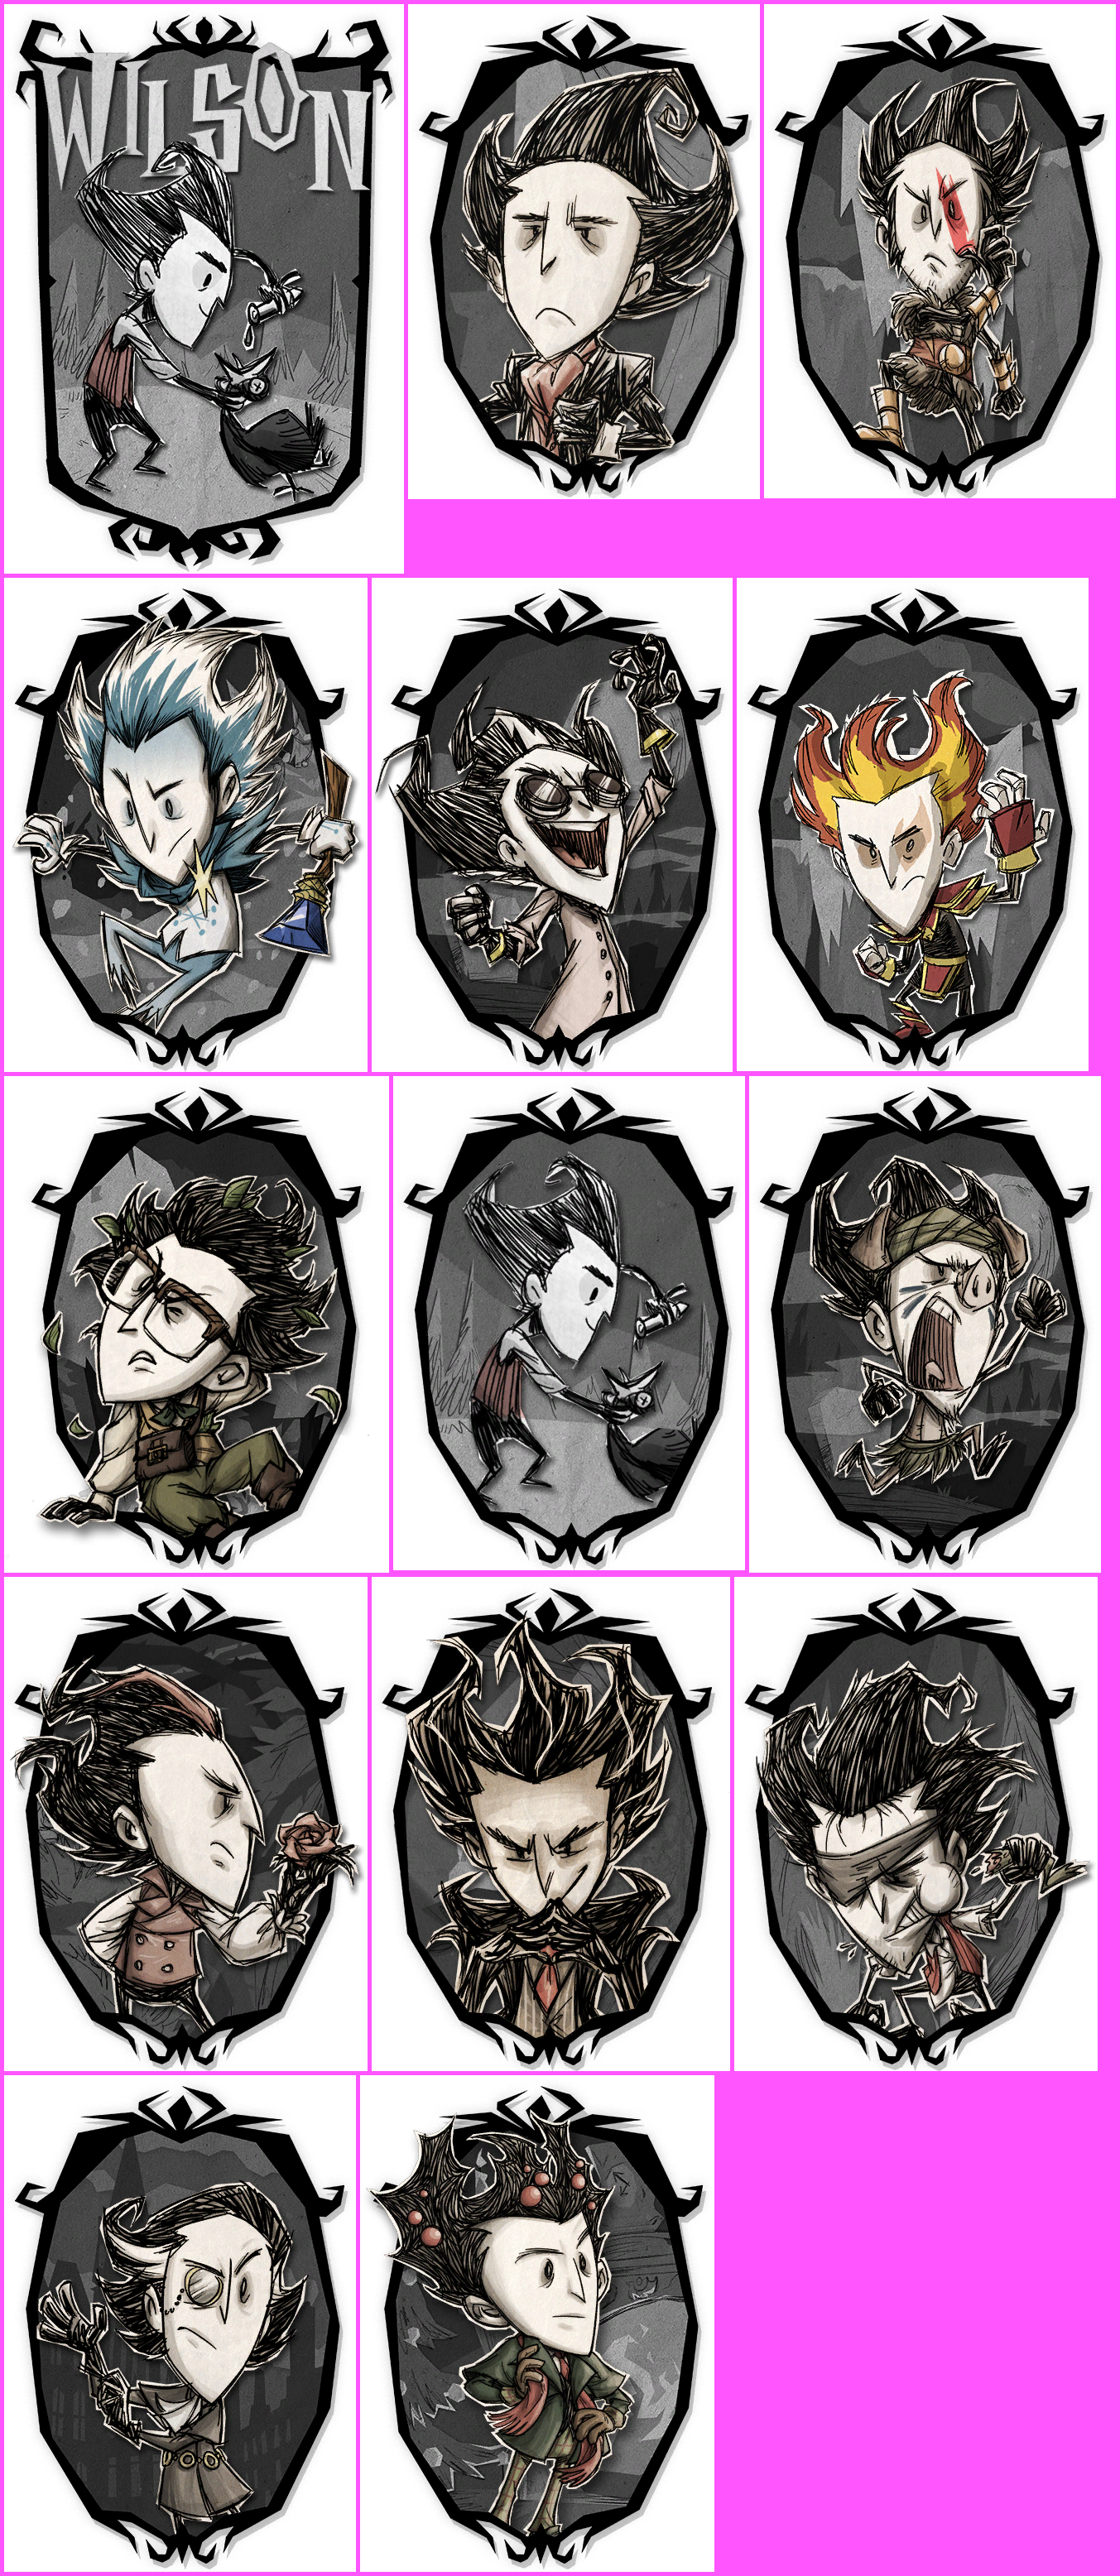 Don't Starve / Don't Starve Together - Wilson Percival Higgsbury